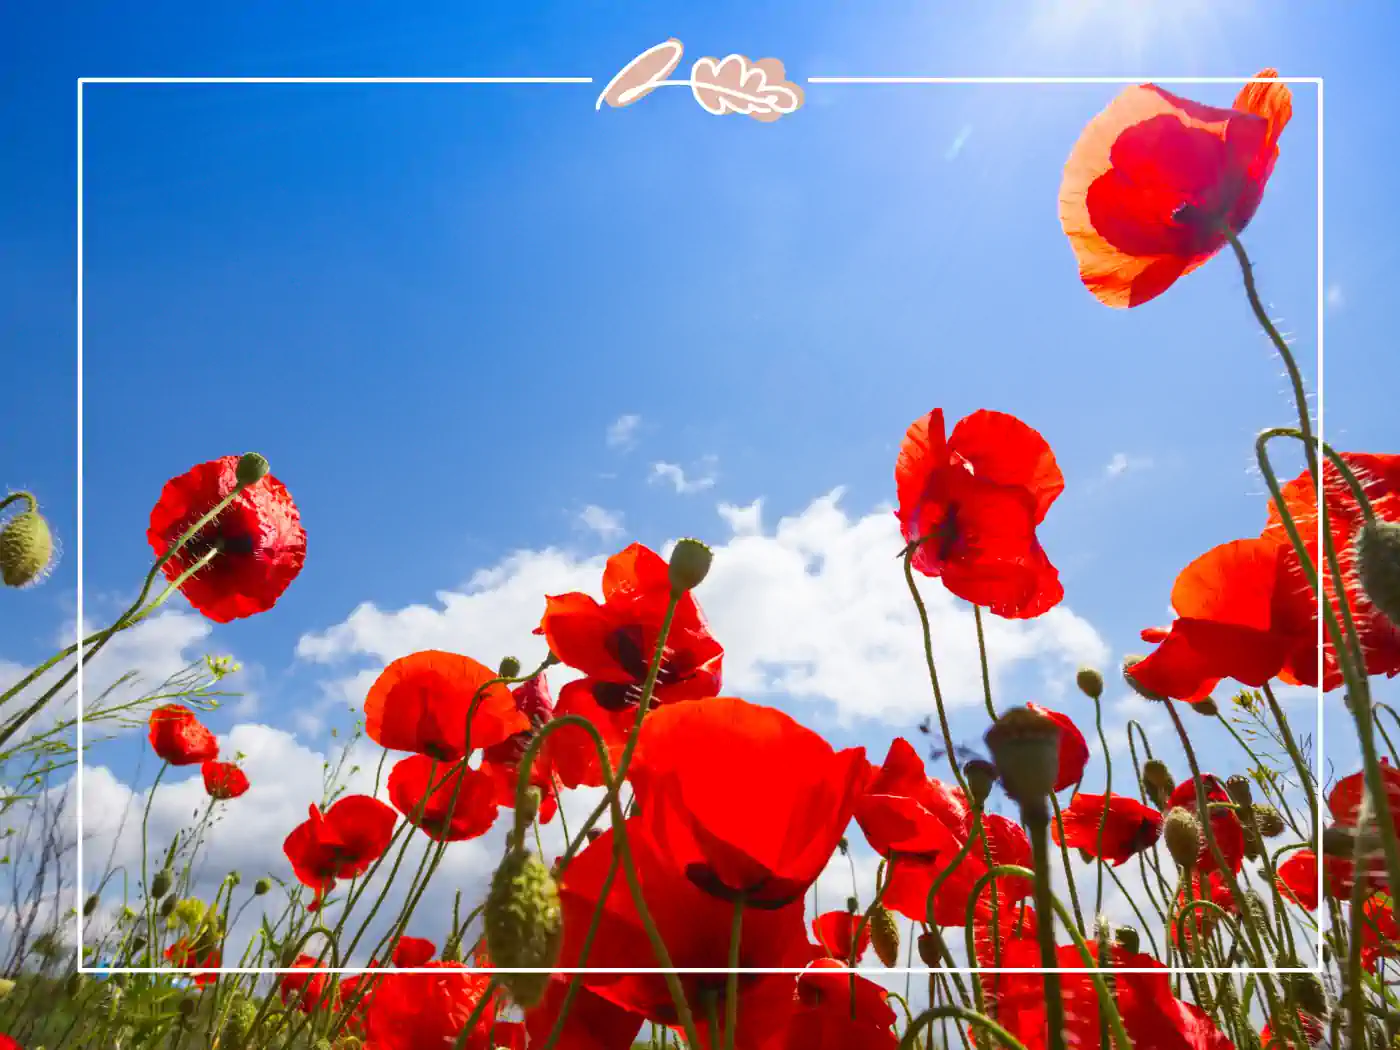 Bright red poppies reaching towards a clear blue sky. Fabulous Flowers and Gifts.